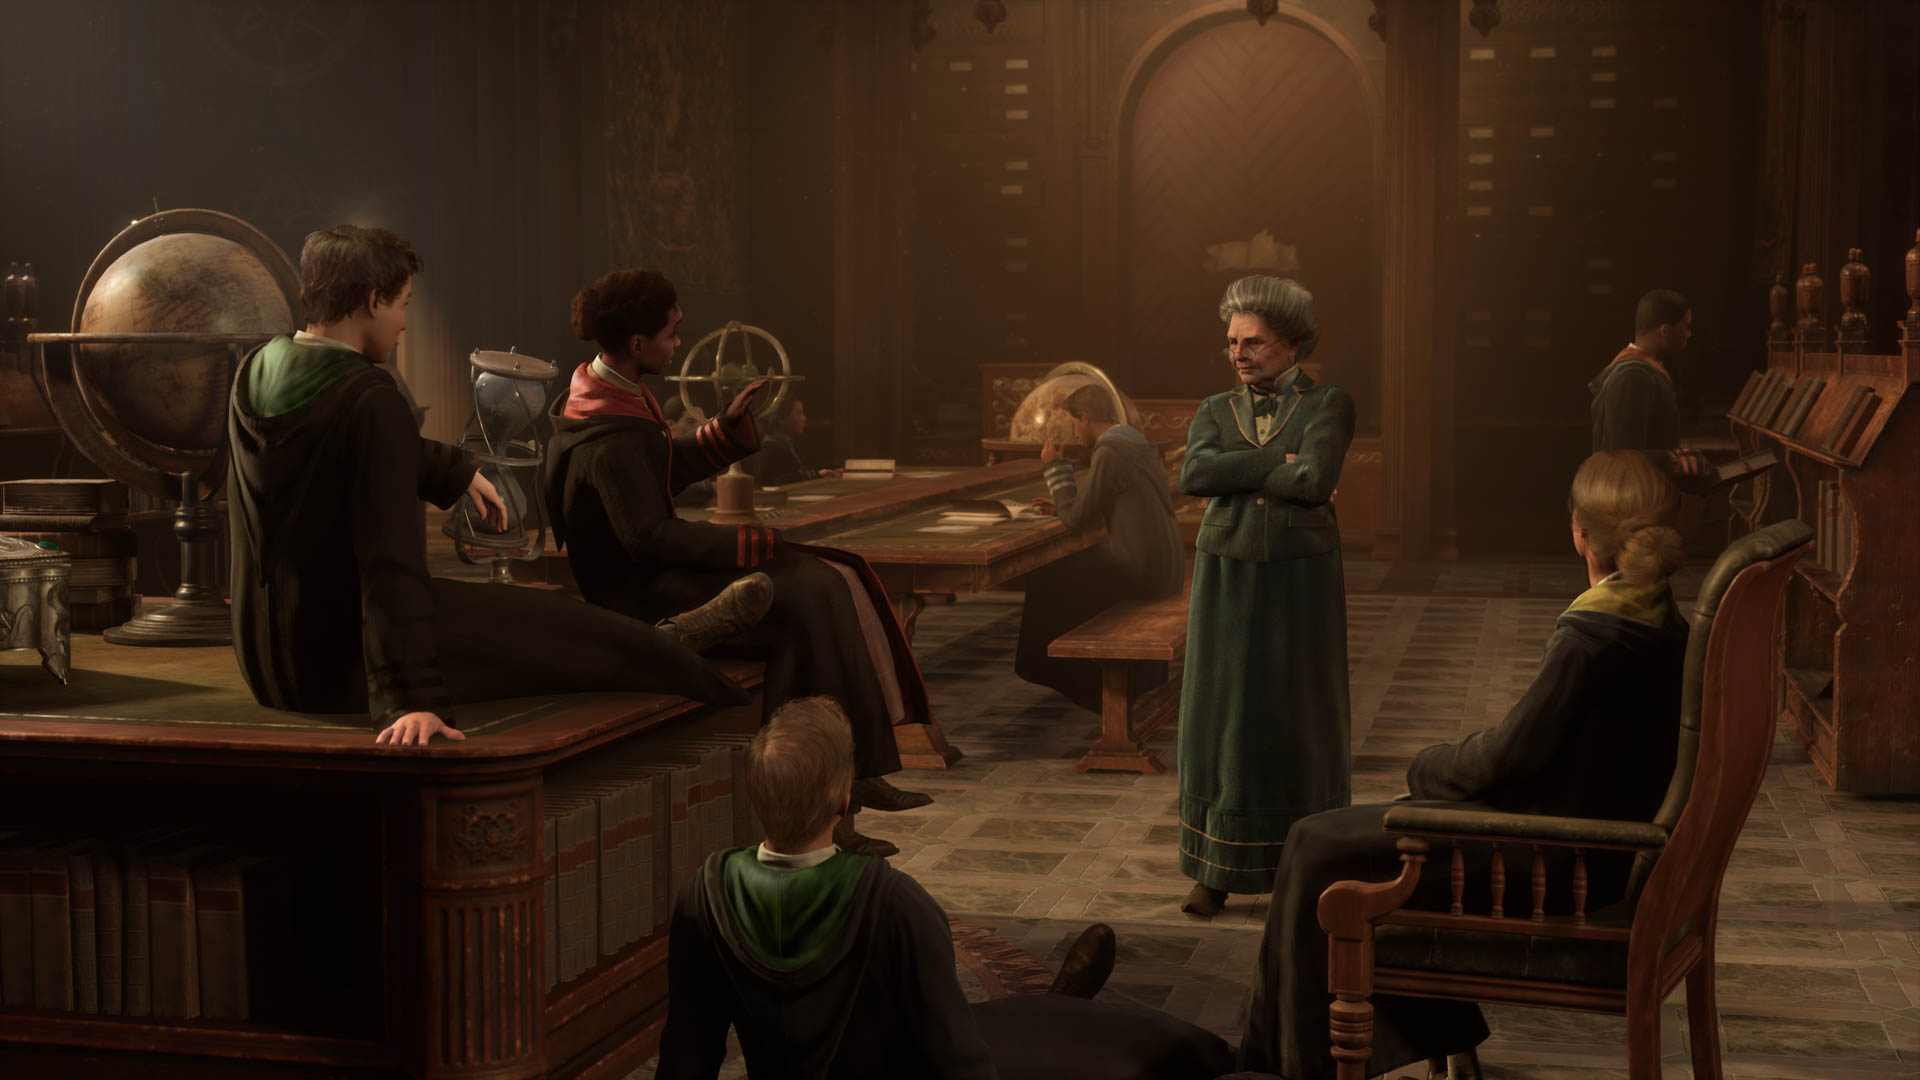 Hogwarts Legacy PC release times - Video Games on Sports Illustrated